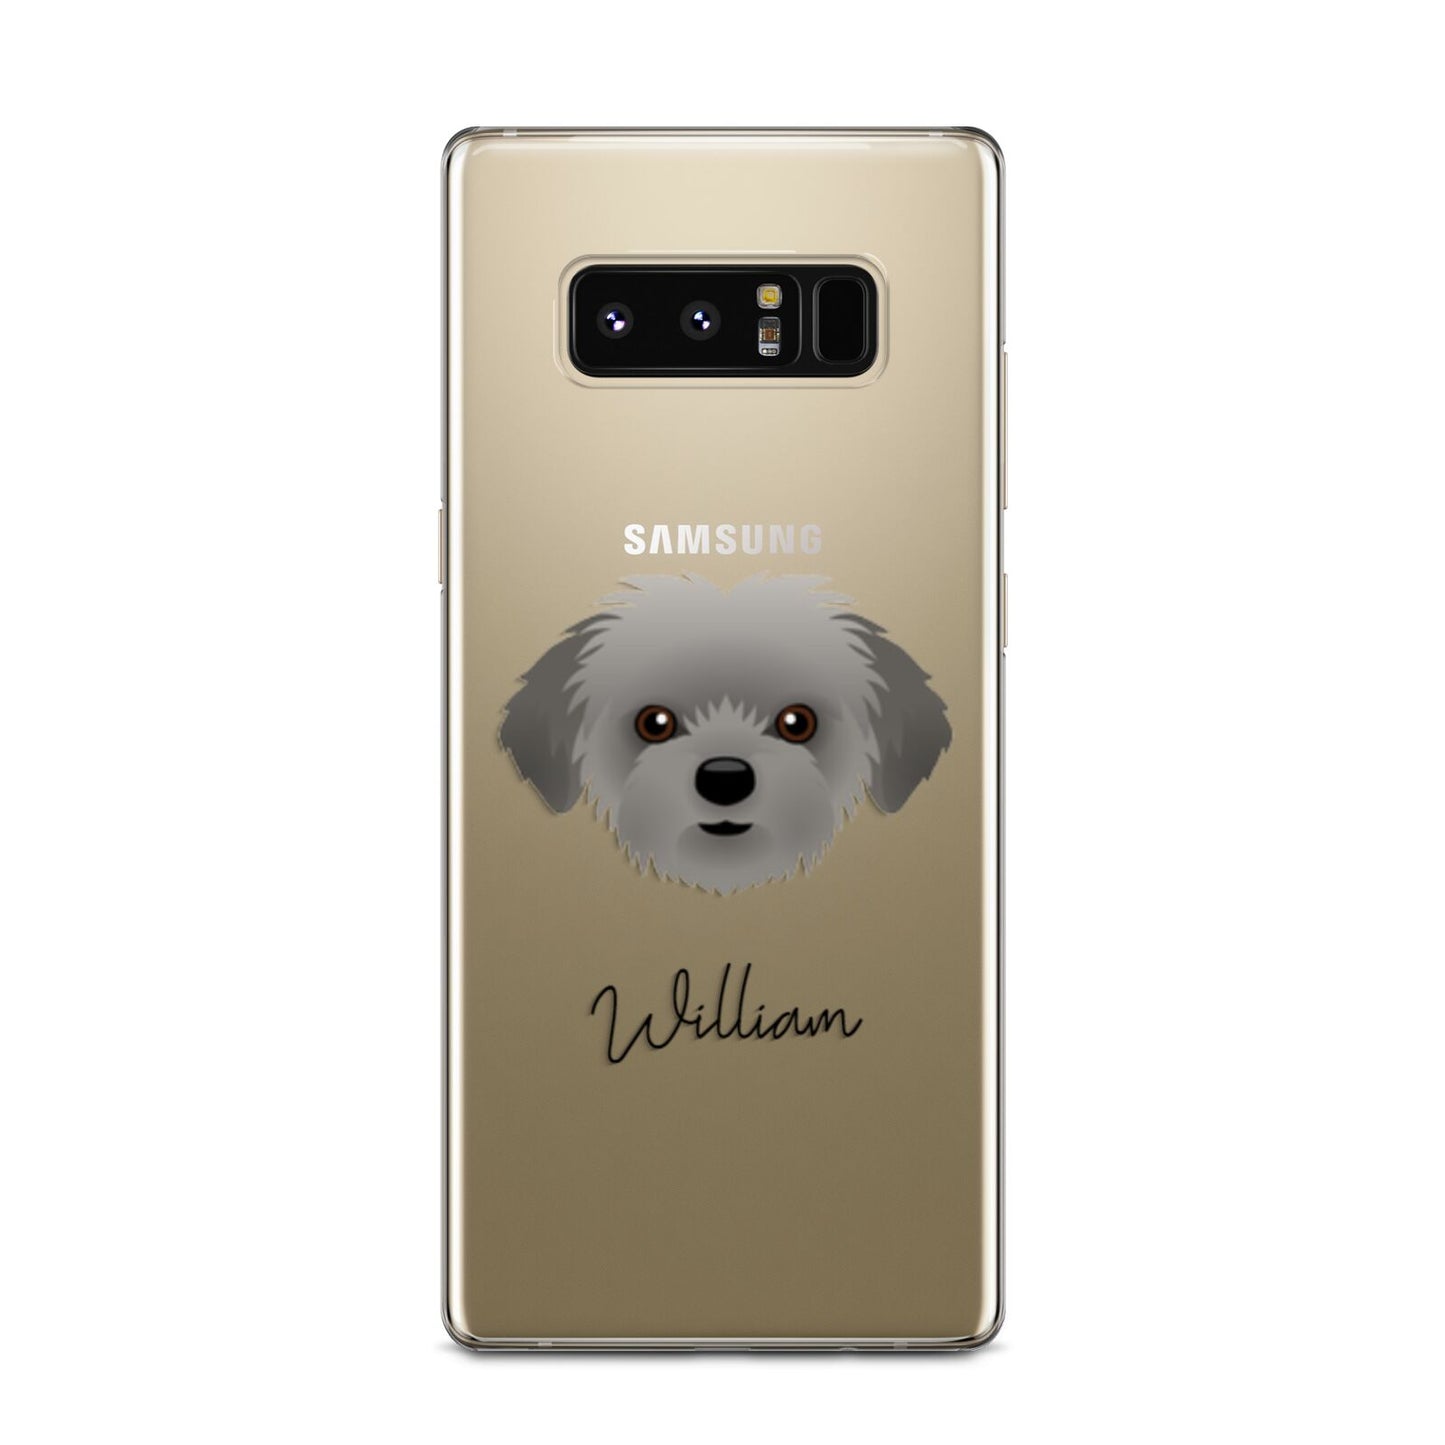 Shorkie Personalised Samsung Galaxy Note 8 Case